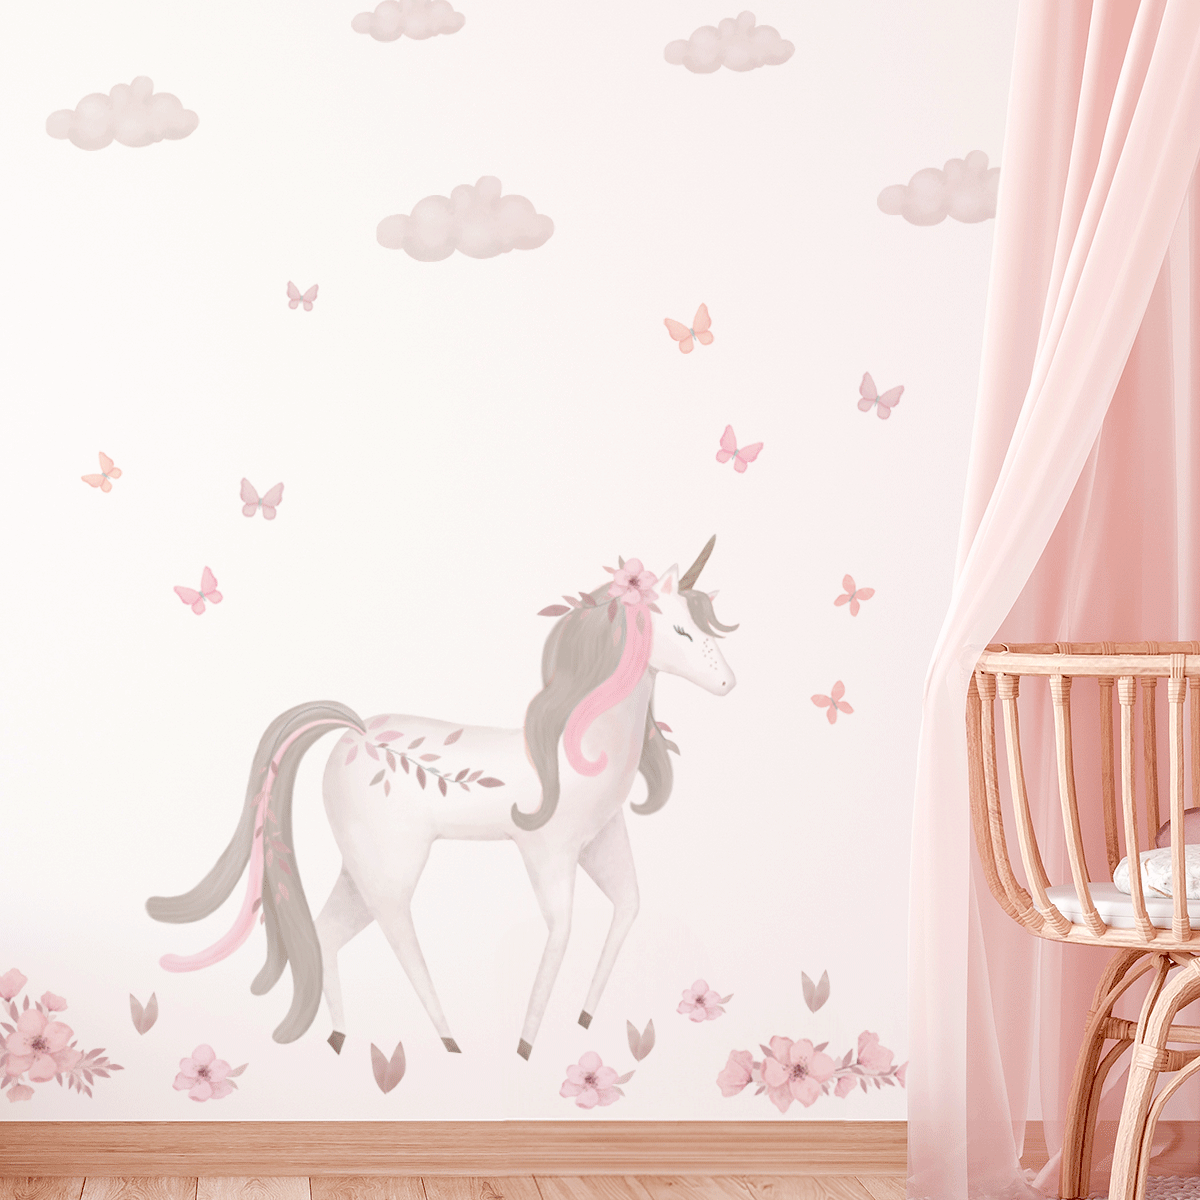 Unicorn wall stickers - Magical unicorn with flowers